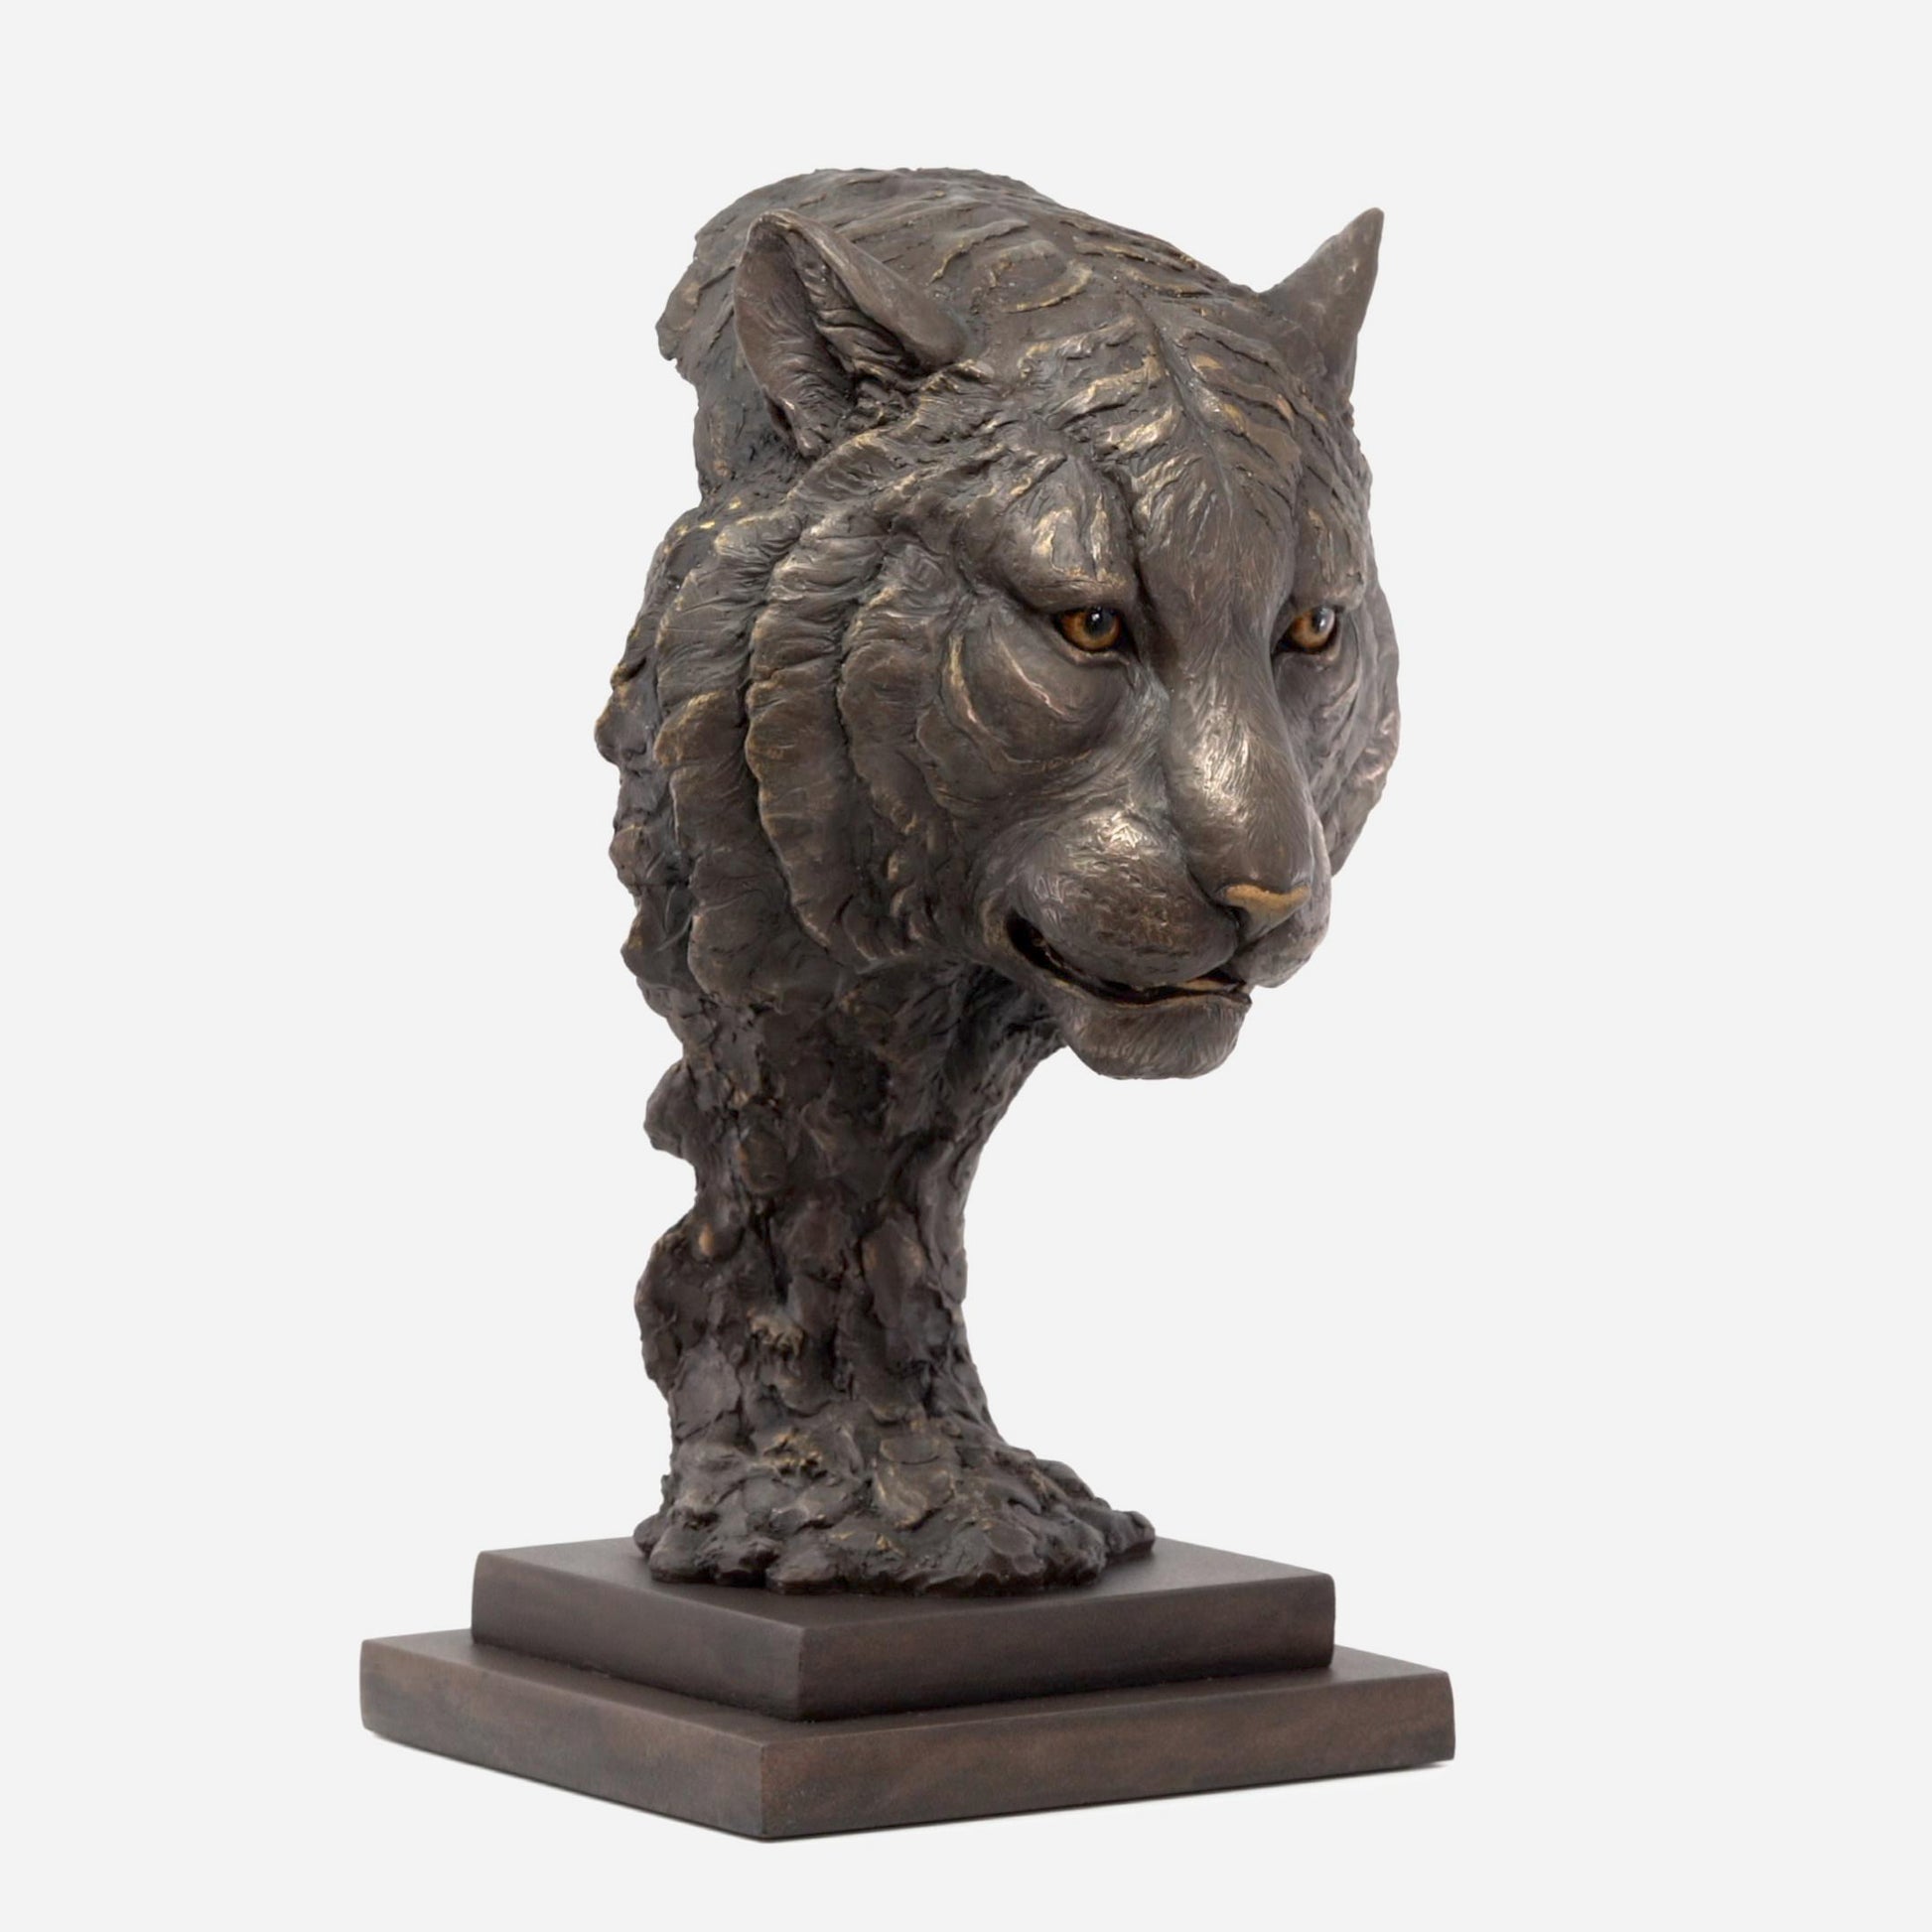 Tiger Bust bronze sculpture by Keith Sherwin